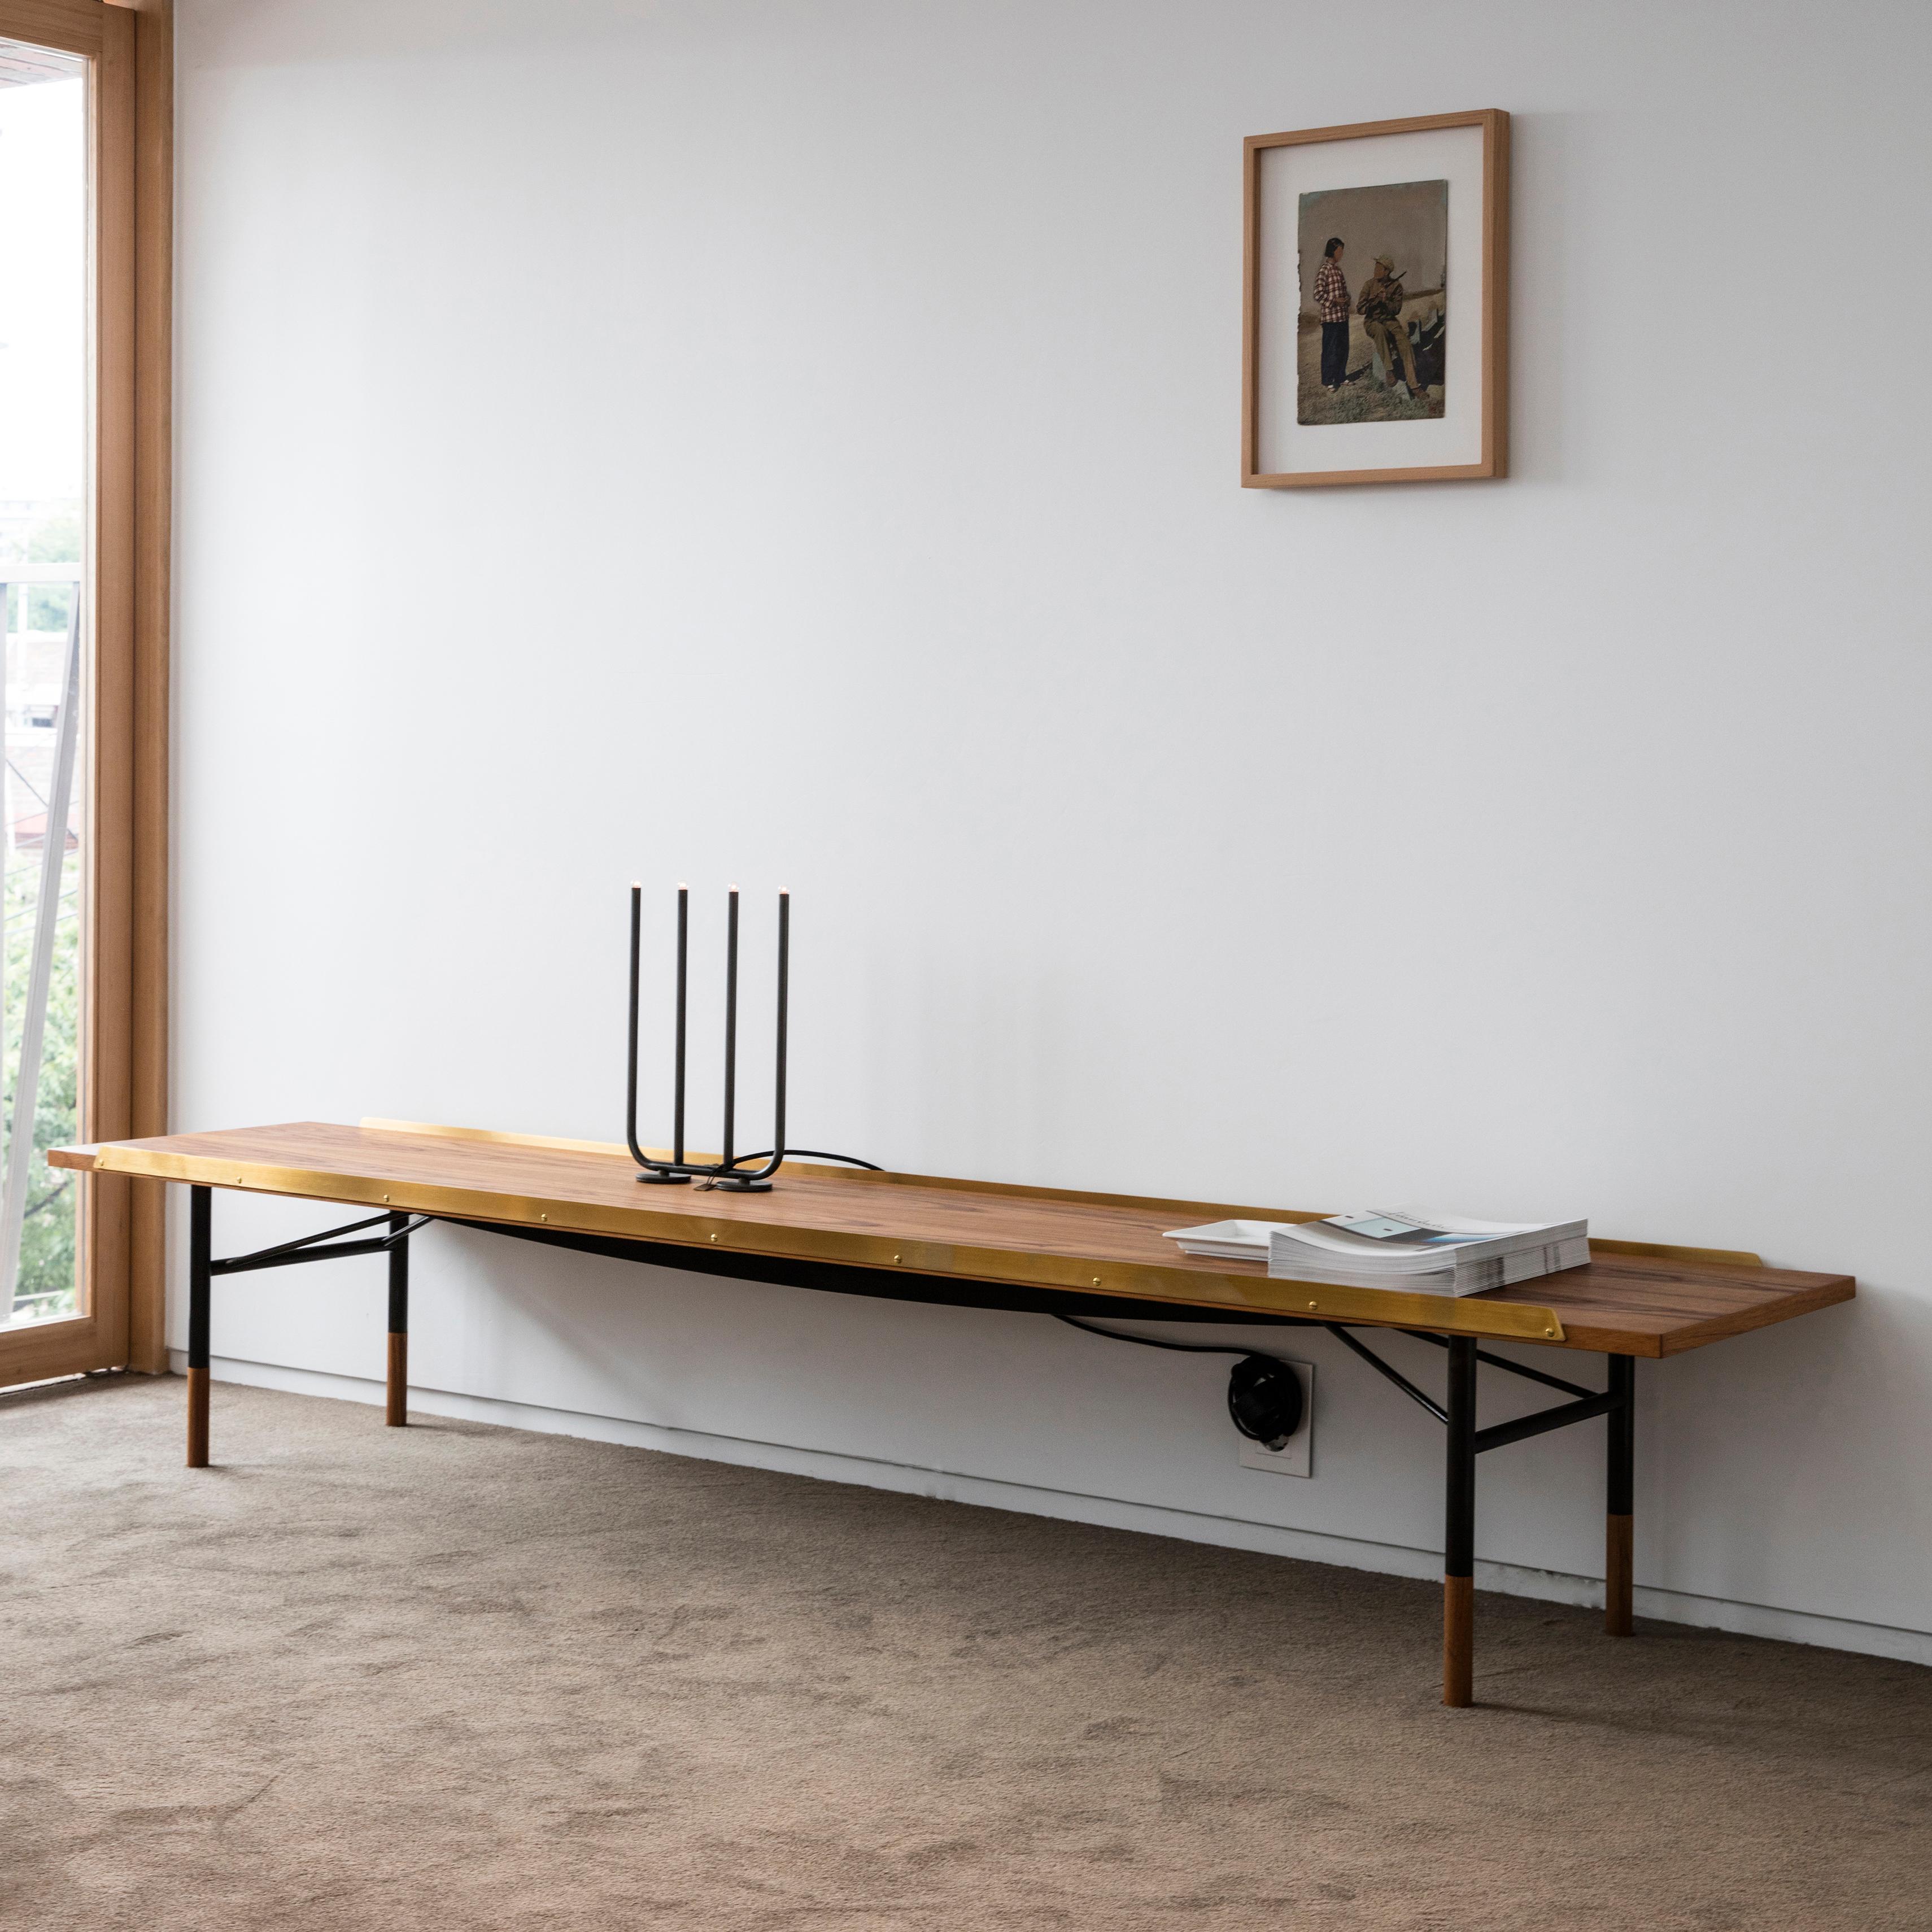 Table bench designed by Finn Juhl in 1953, relaunched in 2012.
Manufactured by House of Finn Juhl in Denmark.

Finn Juhl experienced an international breakthrough in the USA during the early 1950s. He subsequently designed a range of furniture with